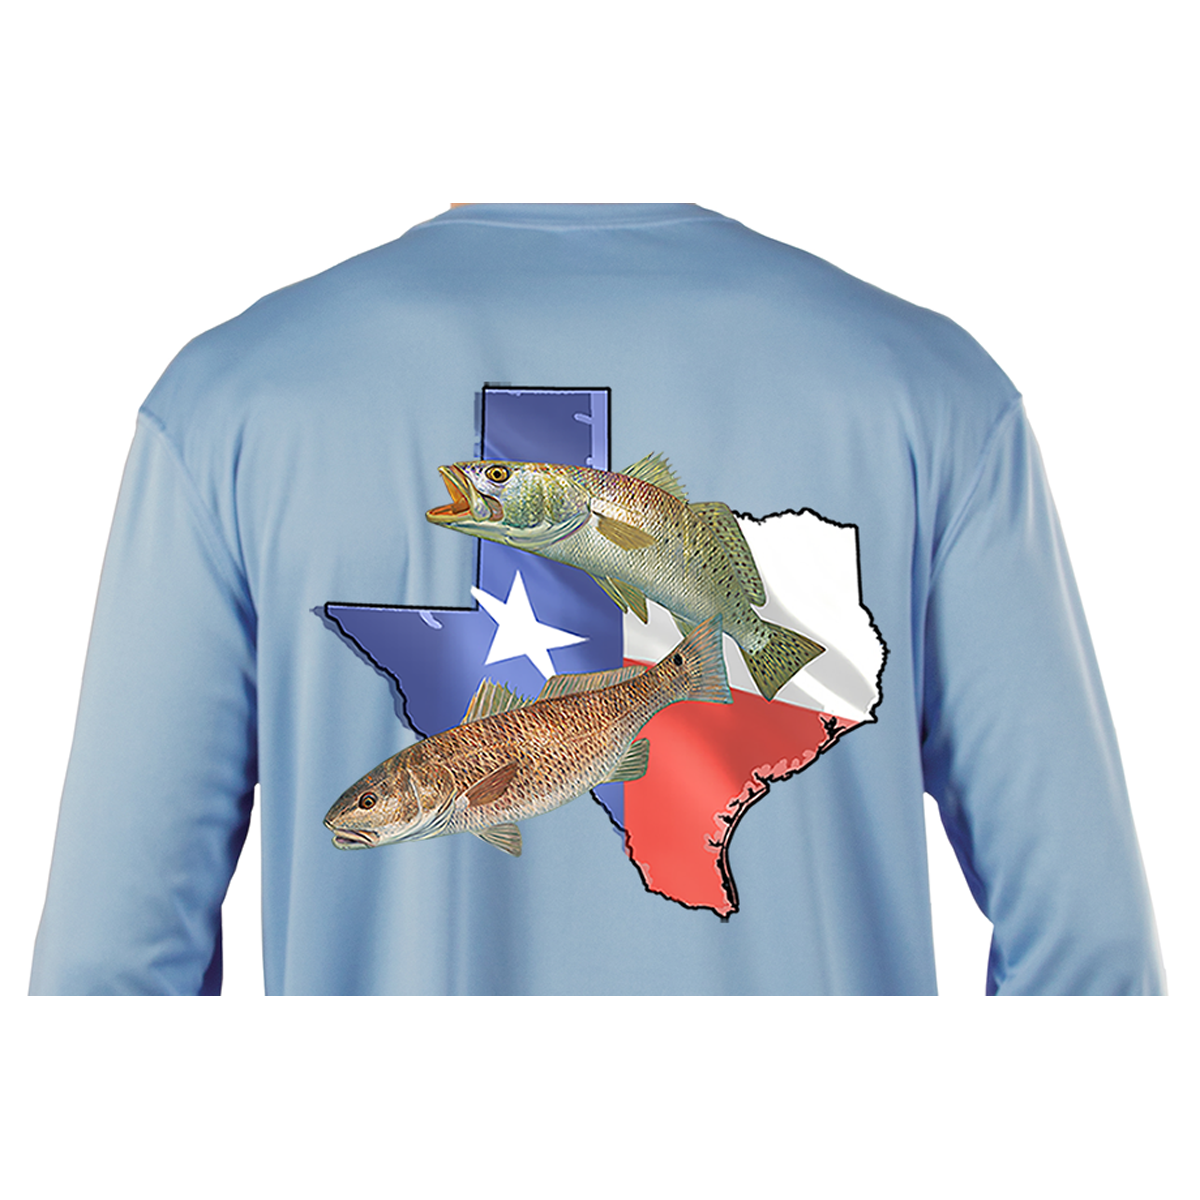 Texas Redfish & Trout Fishing Shirt with Texas State Flag Sleeve